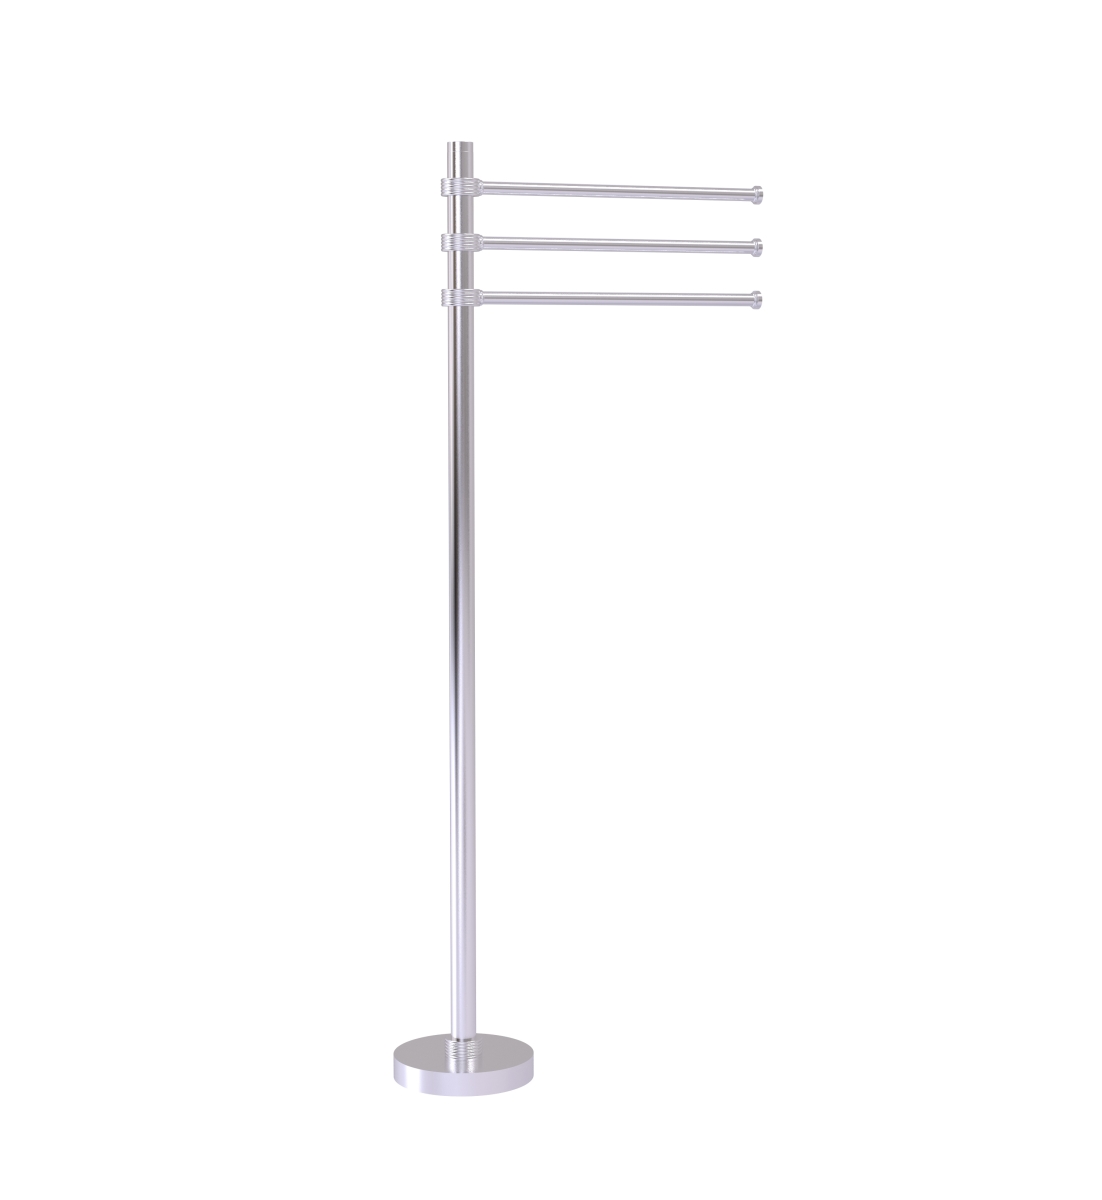 Allied Brass TS-45G-SCH 12 in. Towel Stand with 3 Pivoting Arms, Satin Chrome - 39 x 9.25 x 15.3 in.